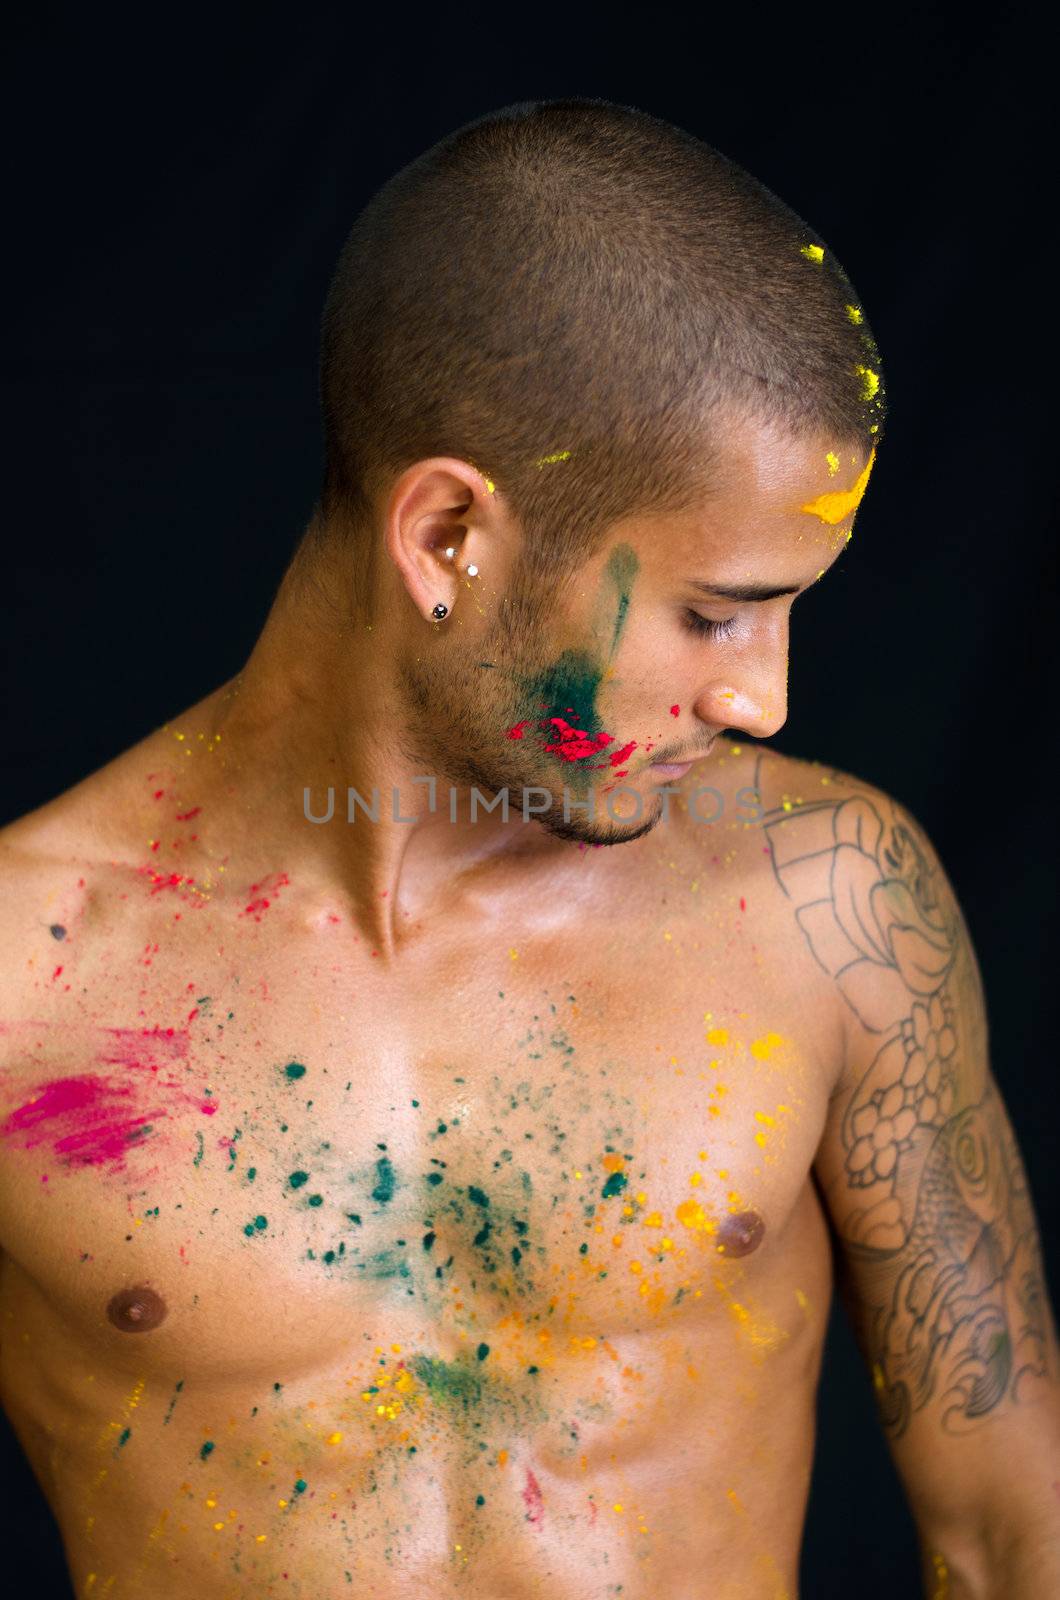 Attractive young man shirtless, skin painted all over with bright Honi colors, looking down